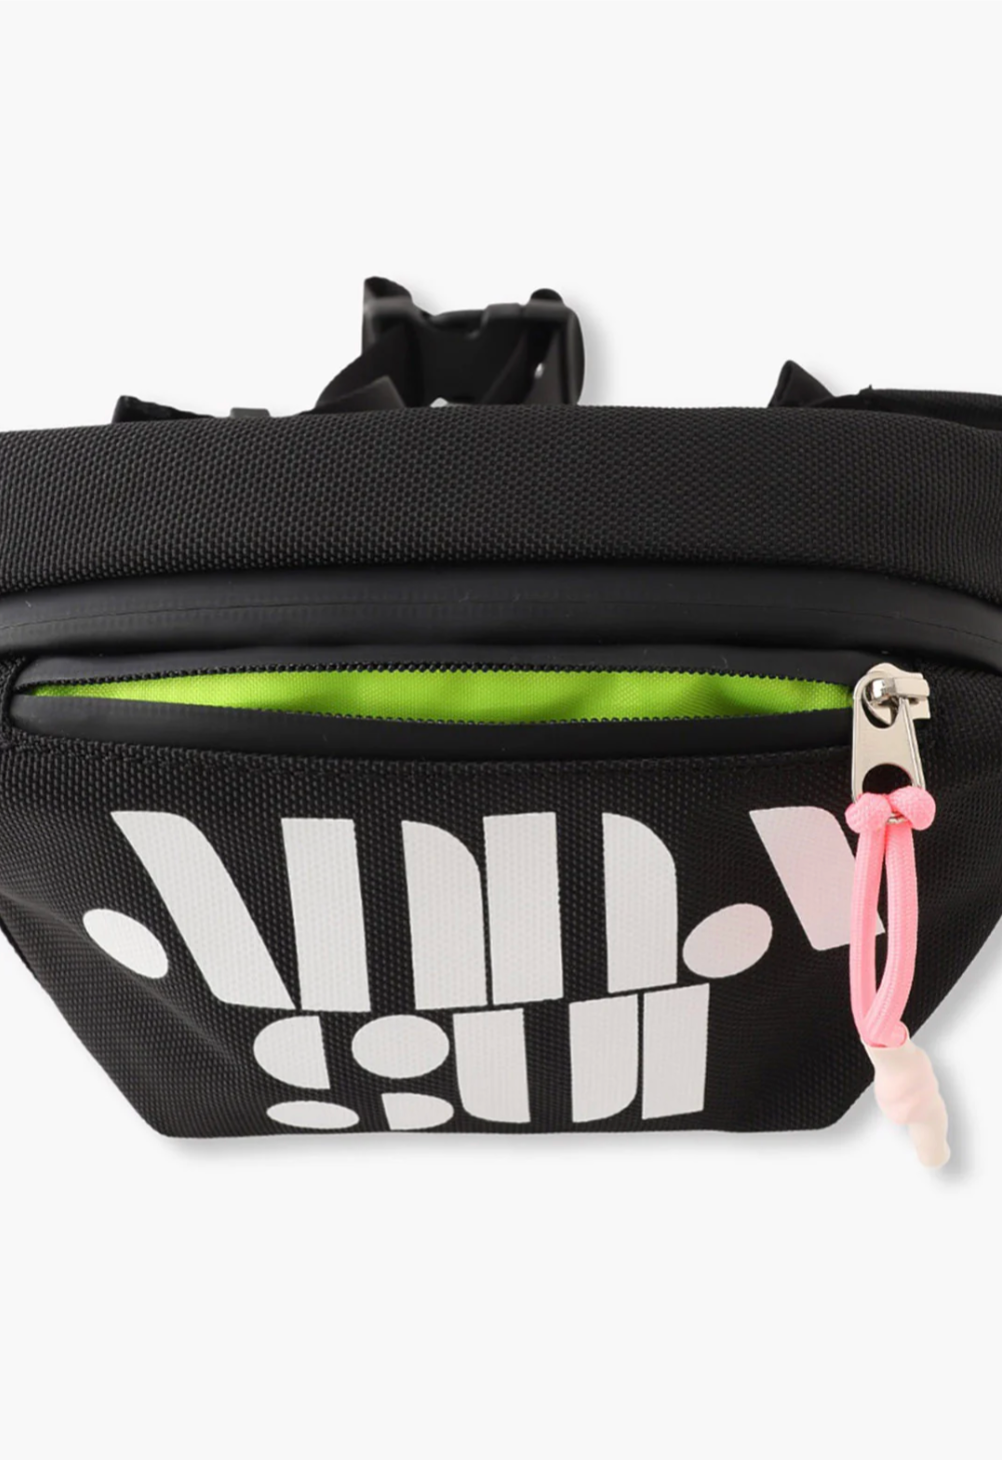 The Anyone Fanny Pack has a small front pocket in a glo-green and large main body pocket